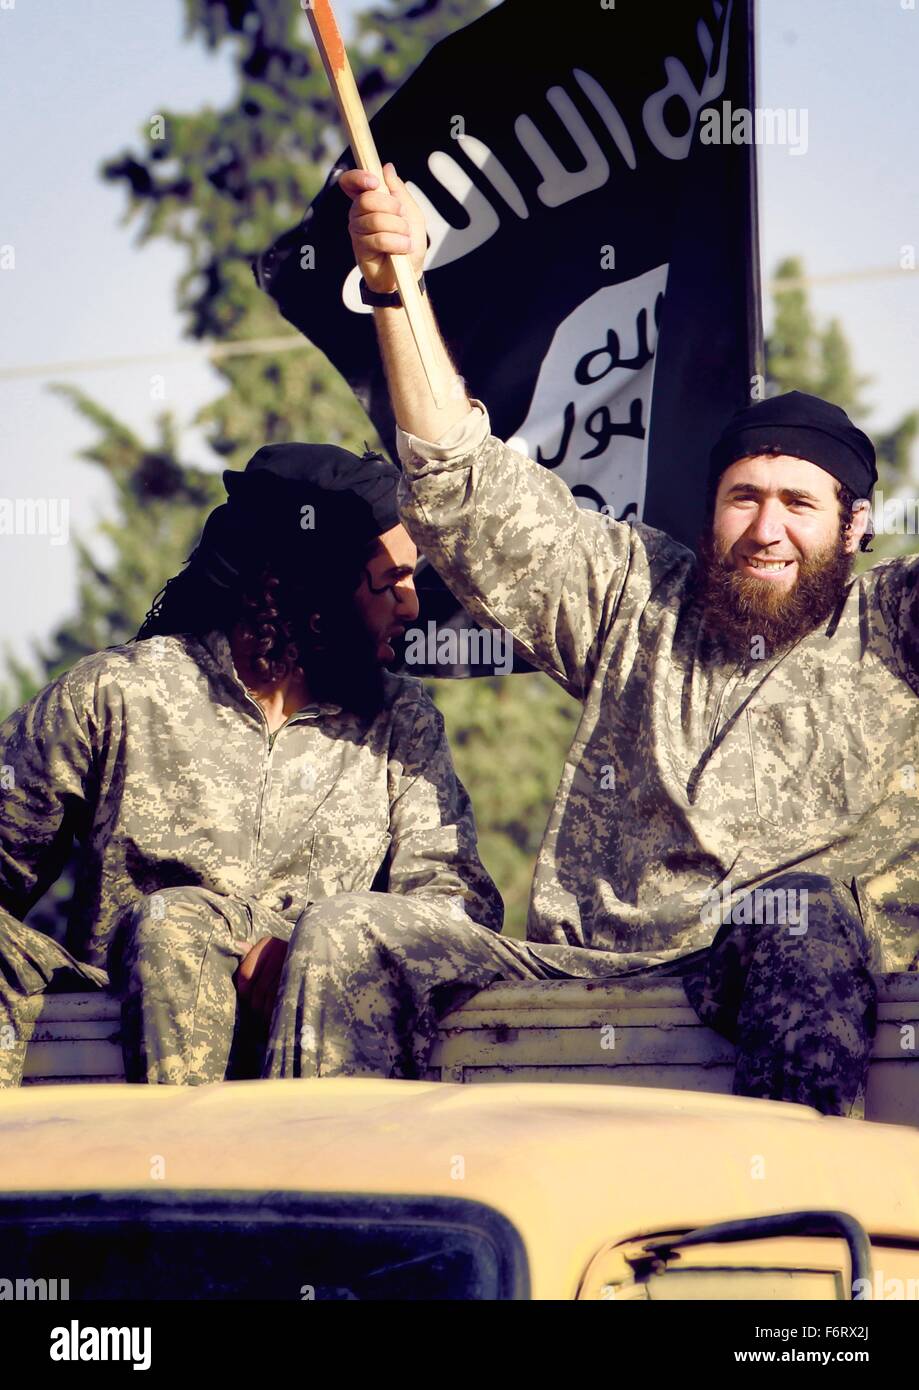 Islamic State of Iraq and the Levant propaganda photo showing ISIS militants parading June 30, 2014 in Raqqa, Northern Syria. Stock Photo